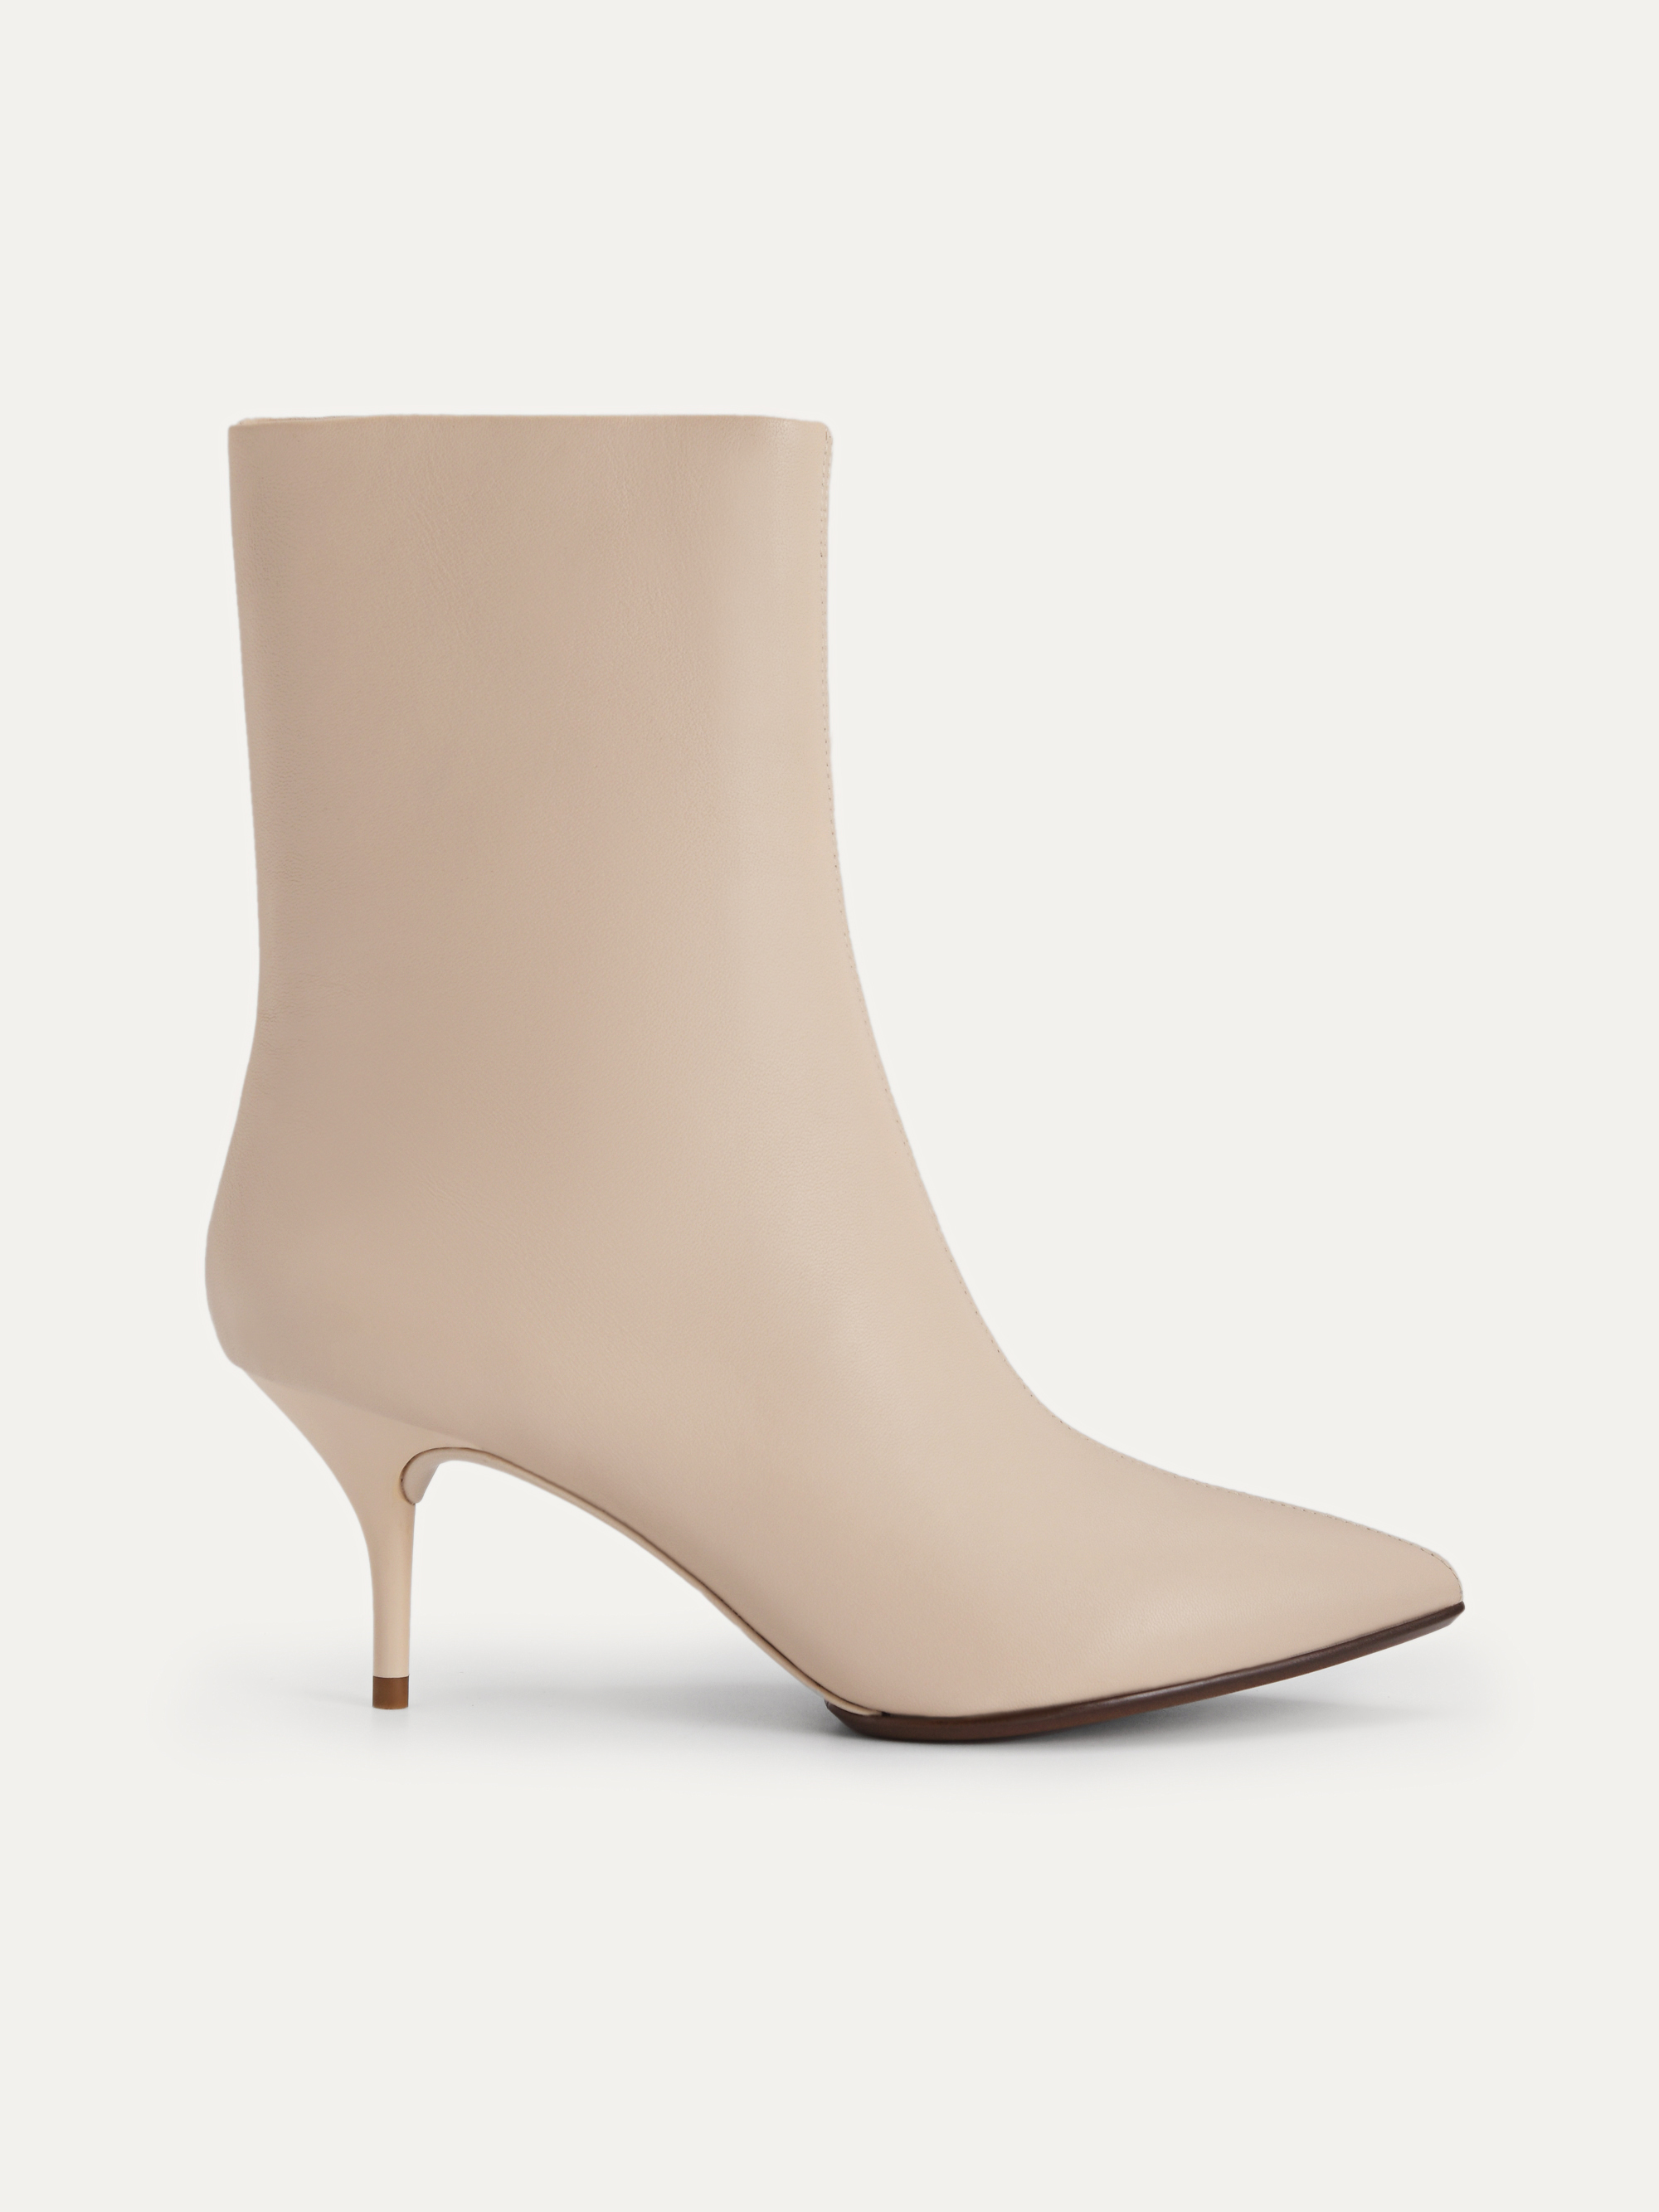 Beige Leather Ankle Boots - PEDRO SG